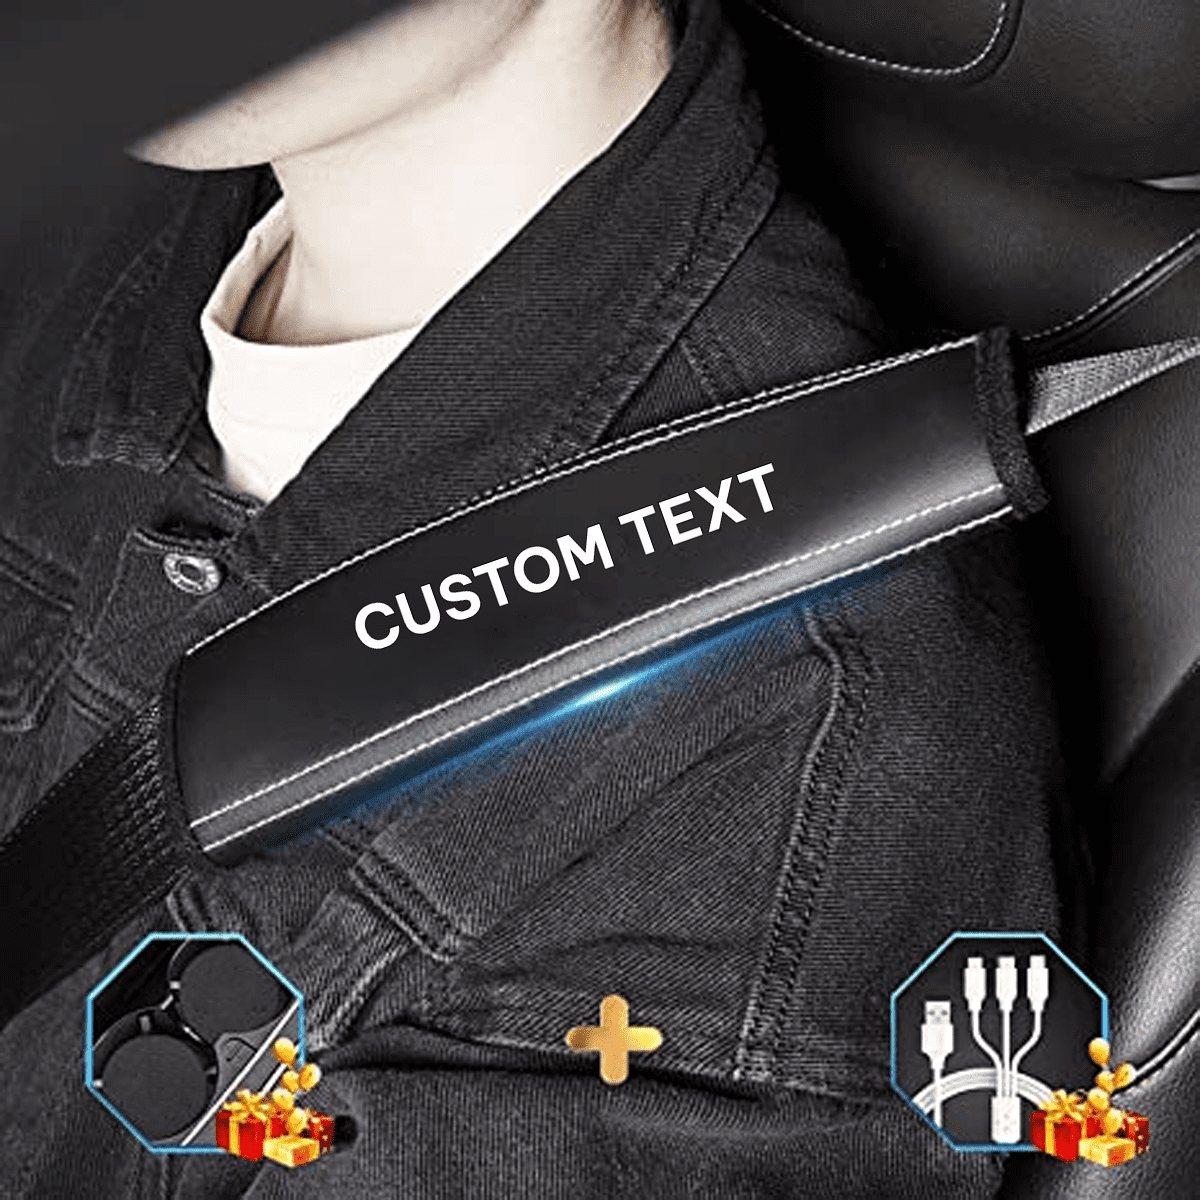 Custom Text and Logo Seat Belt Covers, Fit with BMW M Sport, Microfiber Leather Seat Belt Shoulder Pads for More Comfortable Driving, Set of 2pcs - Delicate Leather